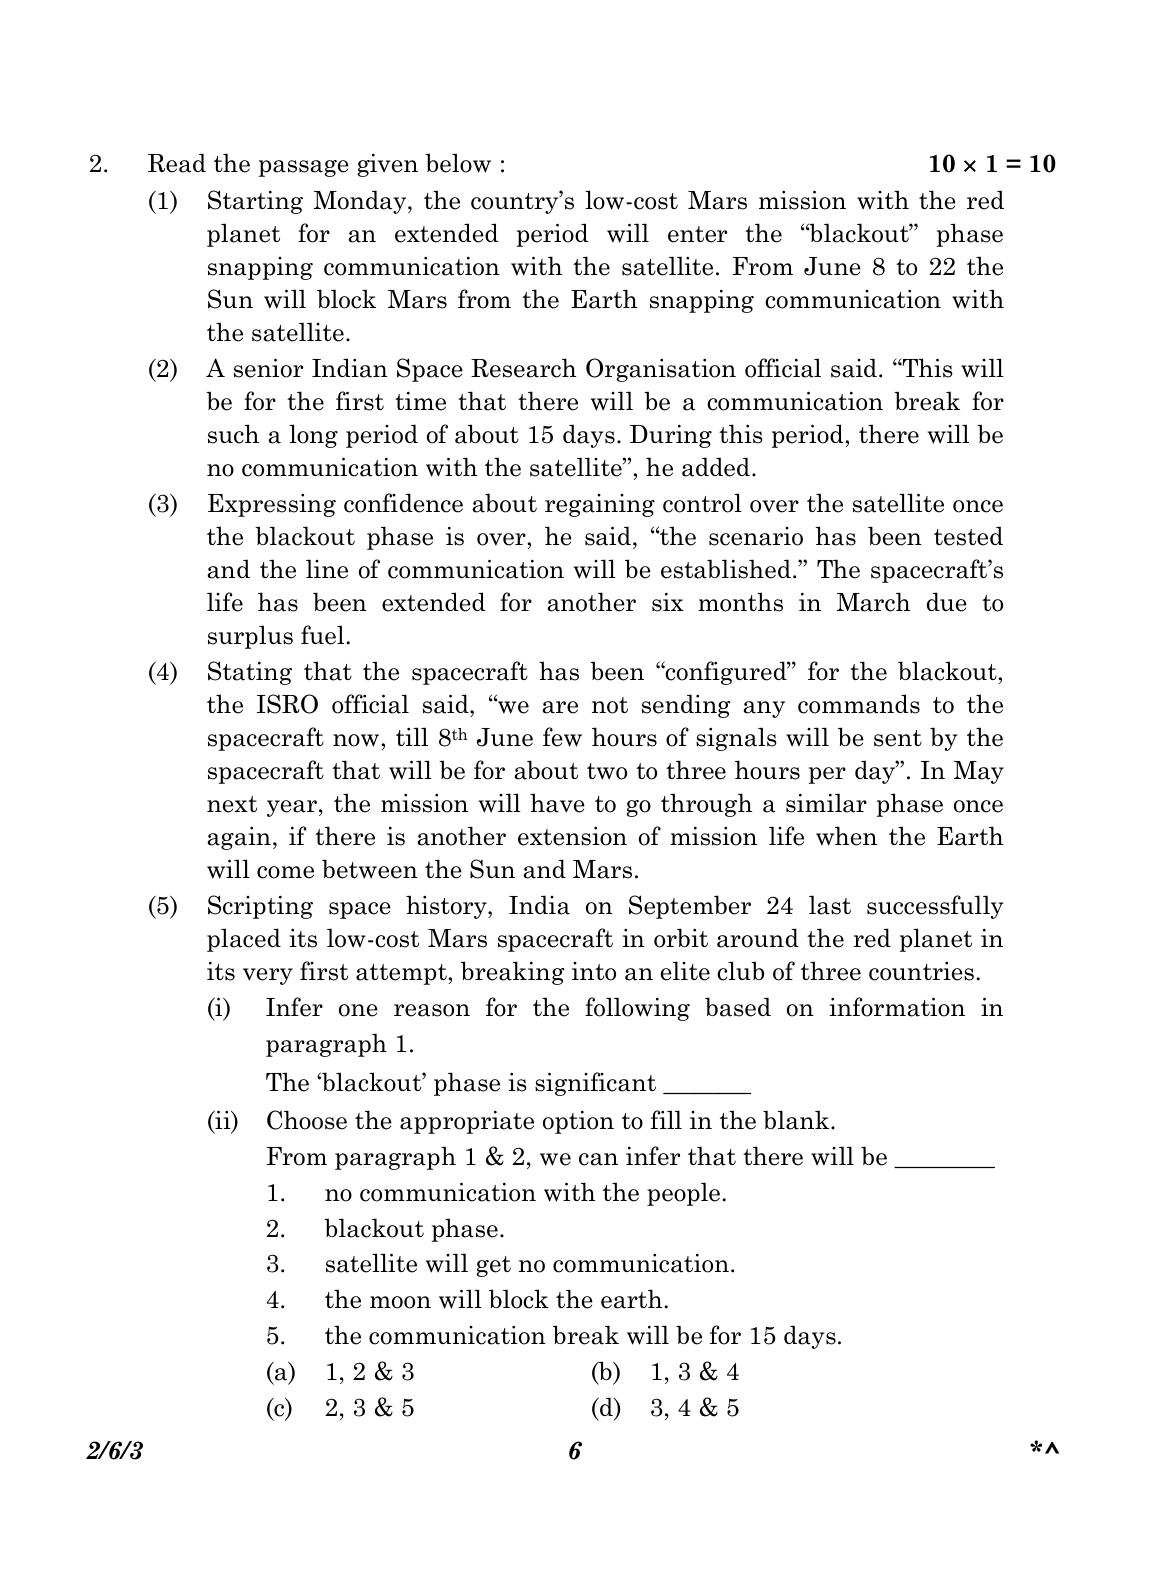 CBSE Class 10 2-6-3_English Language And Literature 2023 Question Paper - Page 6